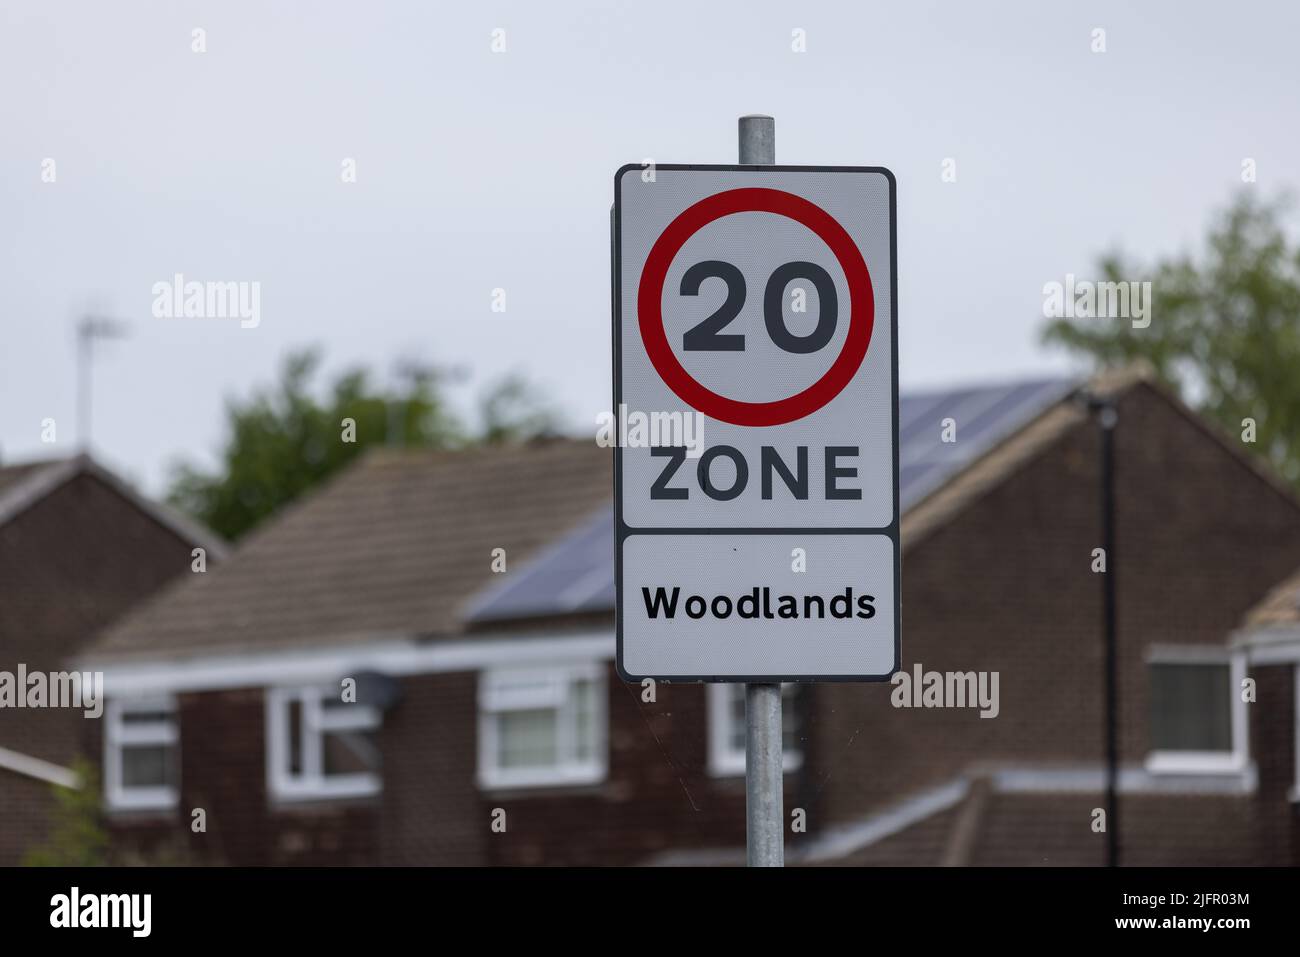 Public speed limit sign at urban area in Harrogate, UK saying 20 zone Woodlands with houses in the background Stock Photo